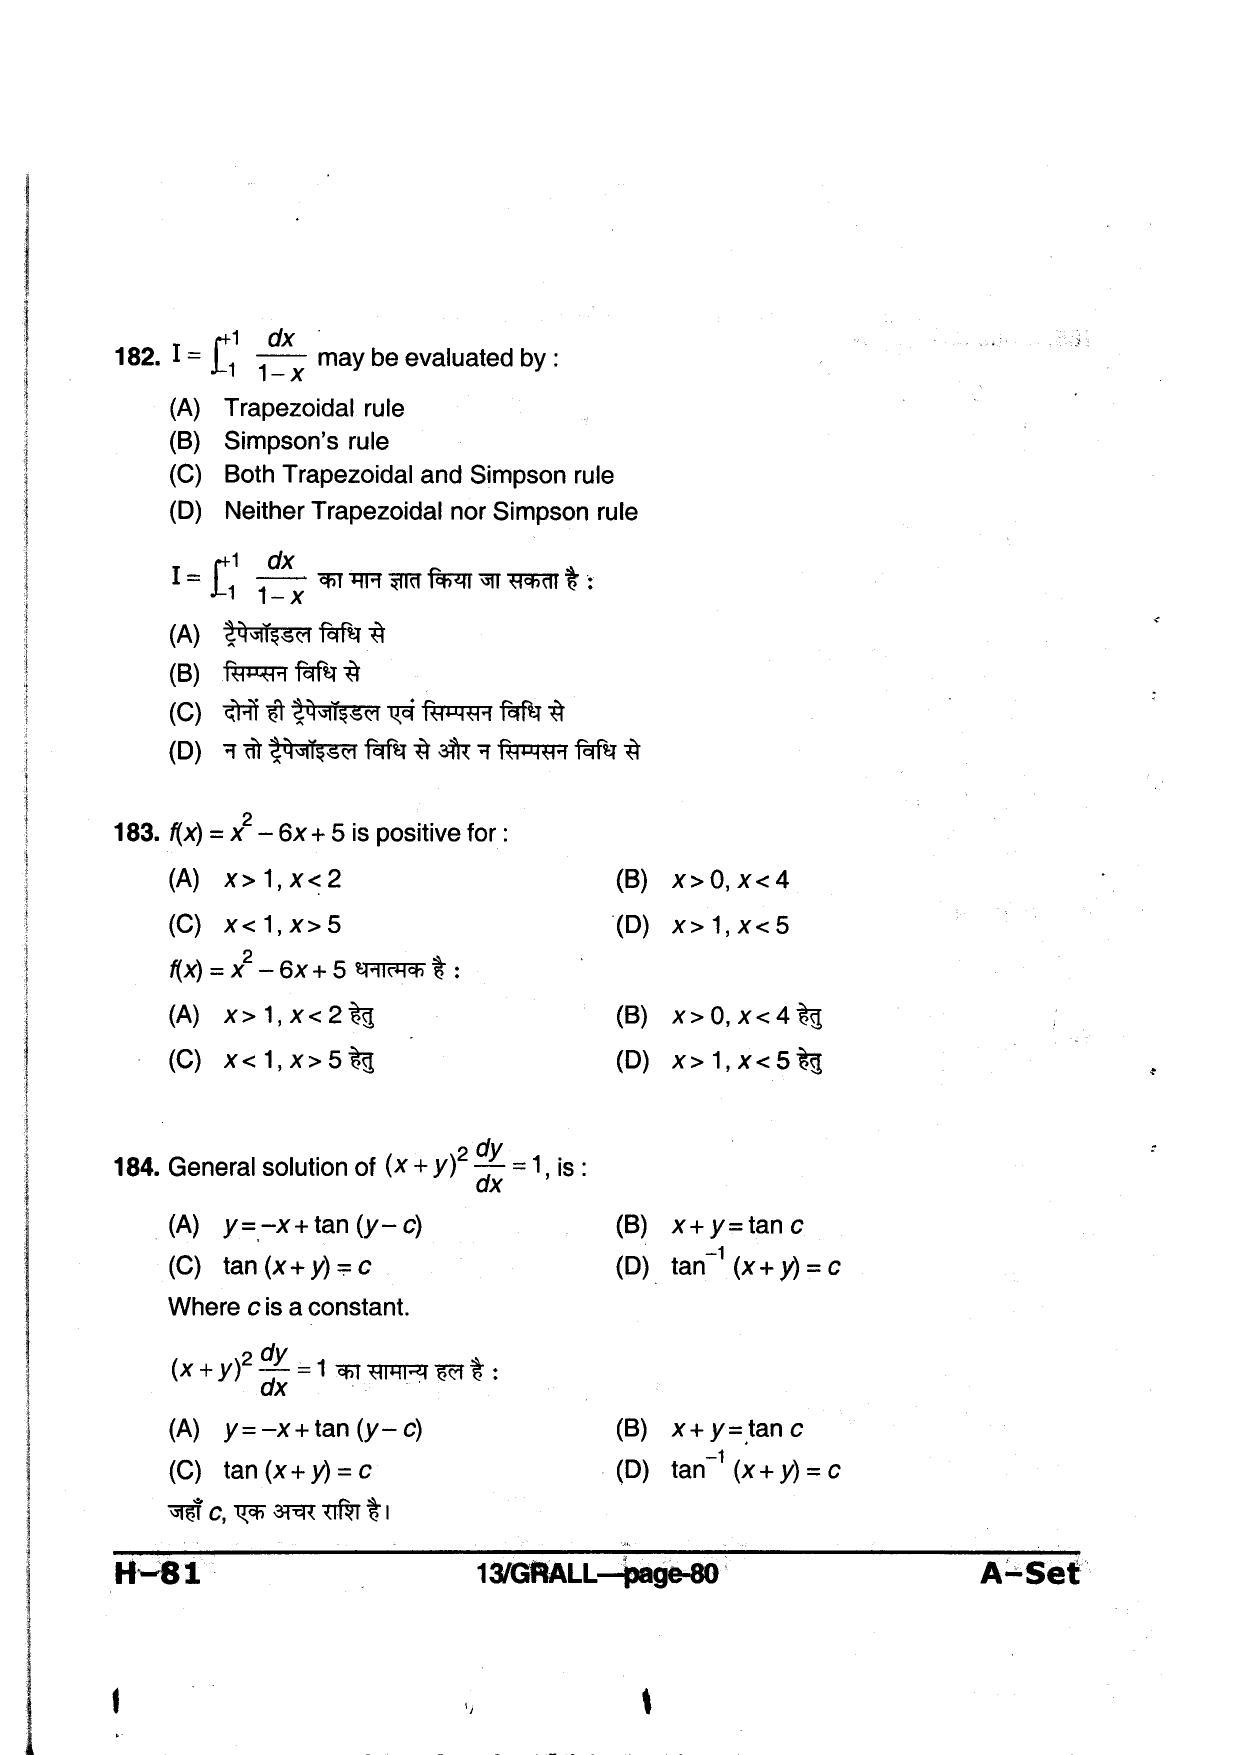 MP PAT 2013 Question Paper - Paper I - Page 80